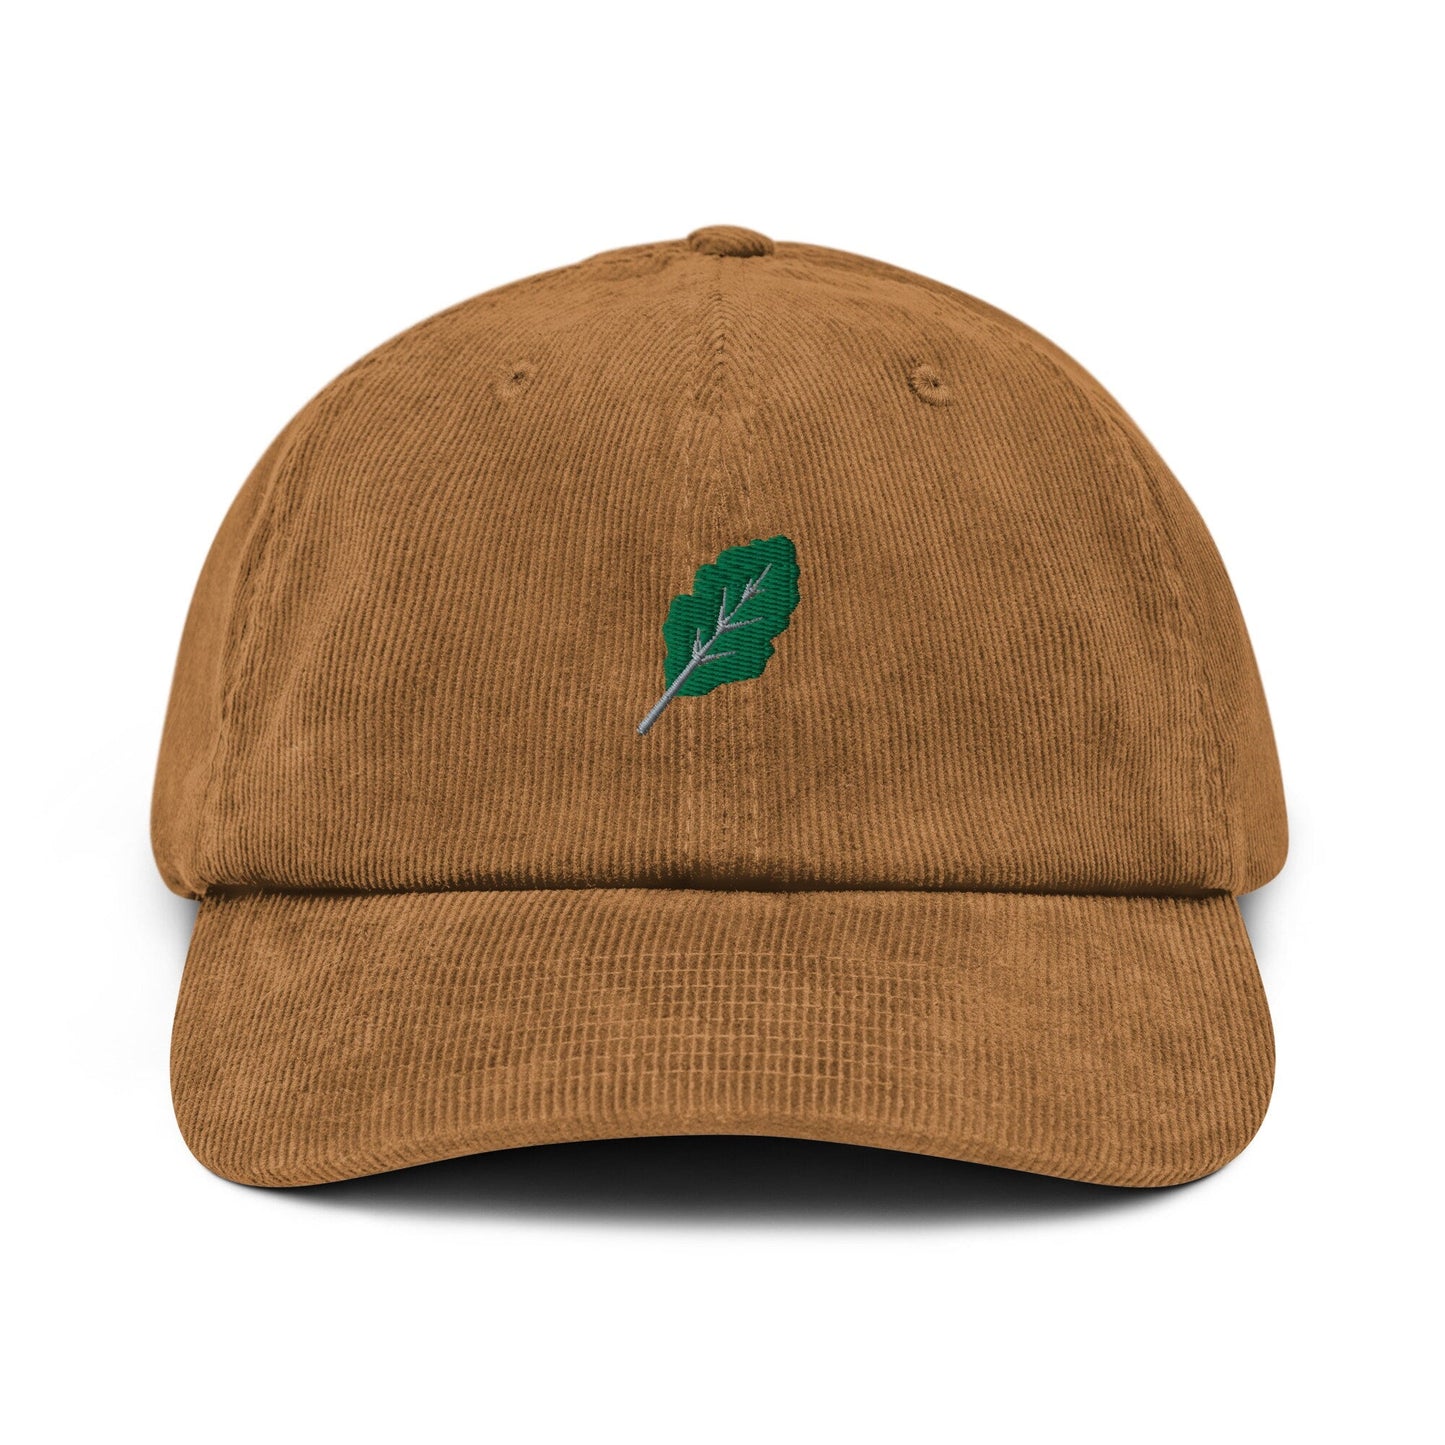 Kale Corduroy Hat - Gift for The Vegetarian Health Conscious - Handmade Embroidered Cap - Evilwater Originals